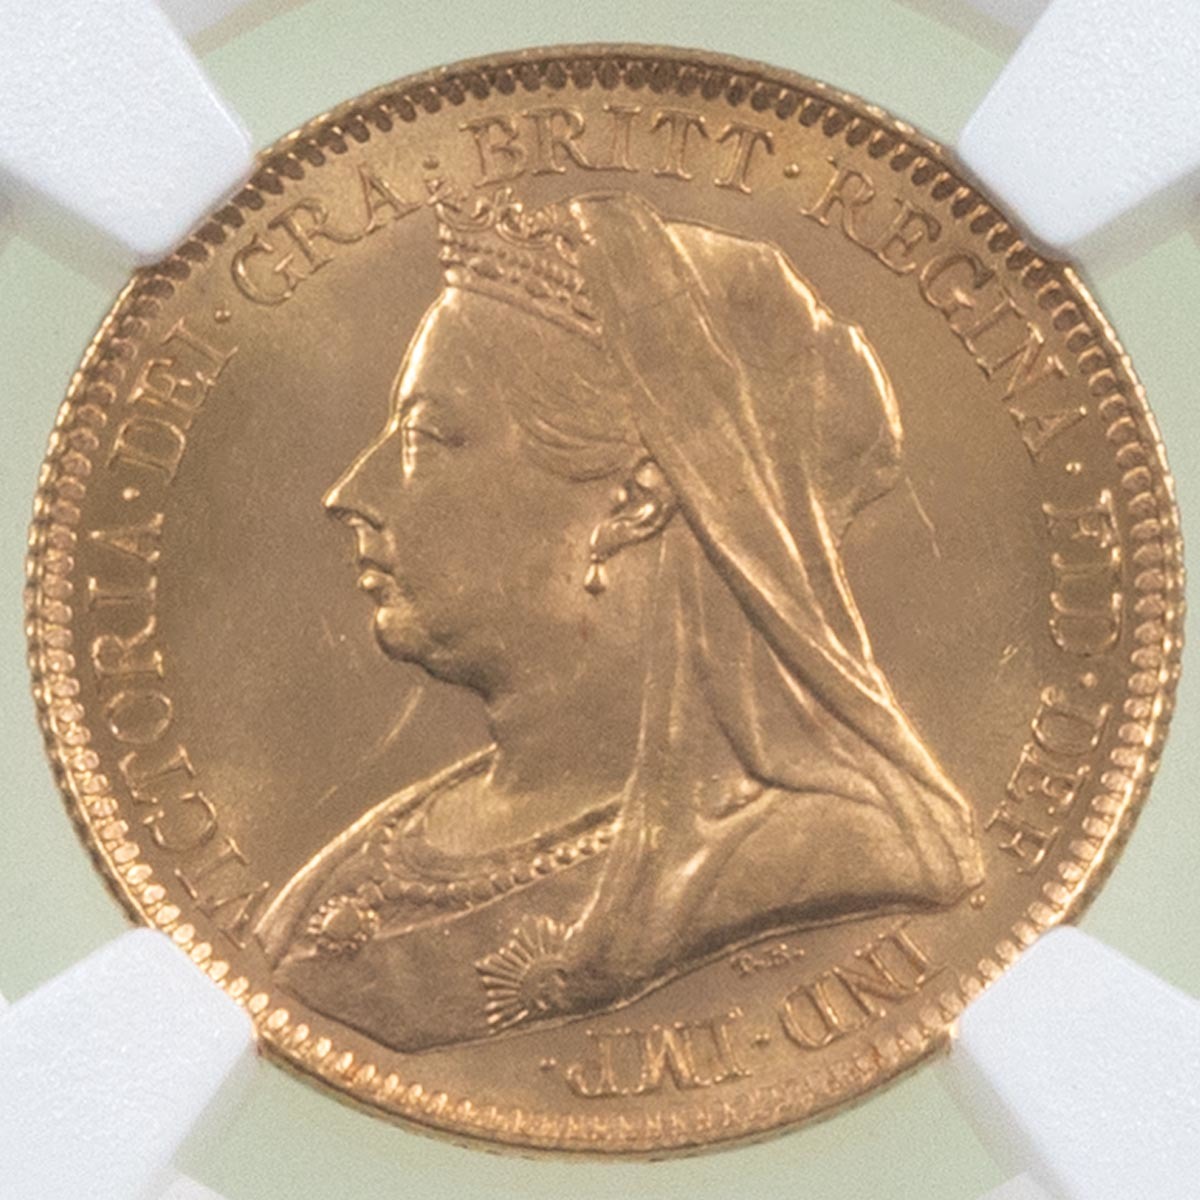 1893 Queen Victoria Gold Half Sovereign London Mint Jubilee Head NGC Graded MS 62 Obverse